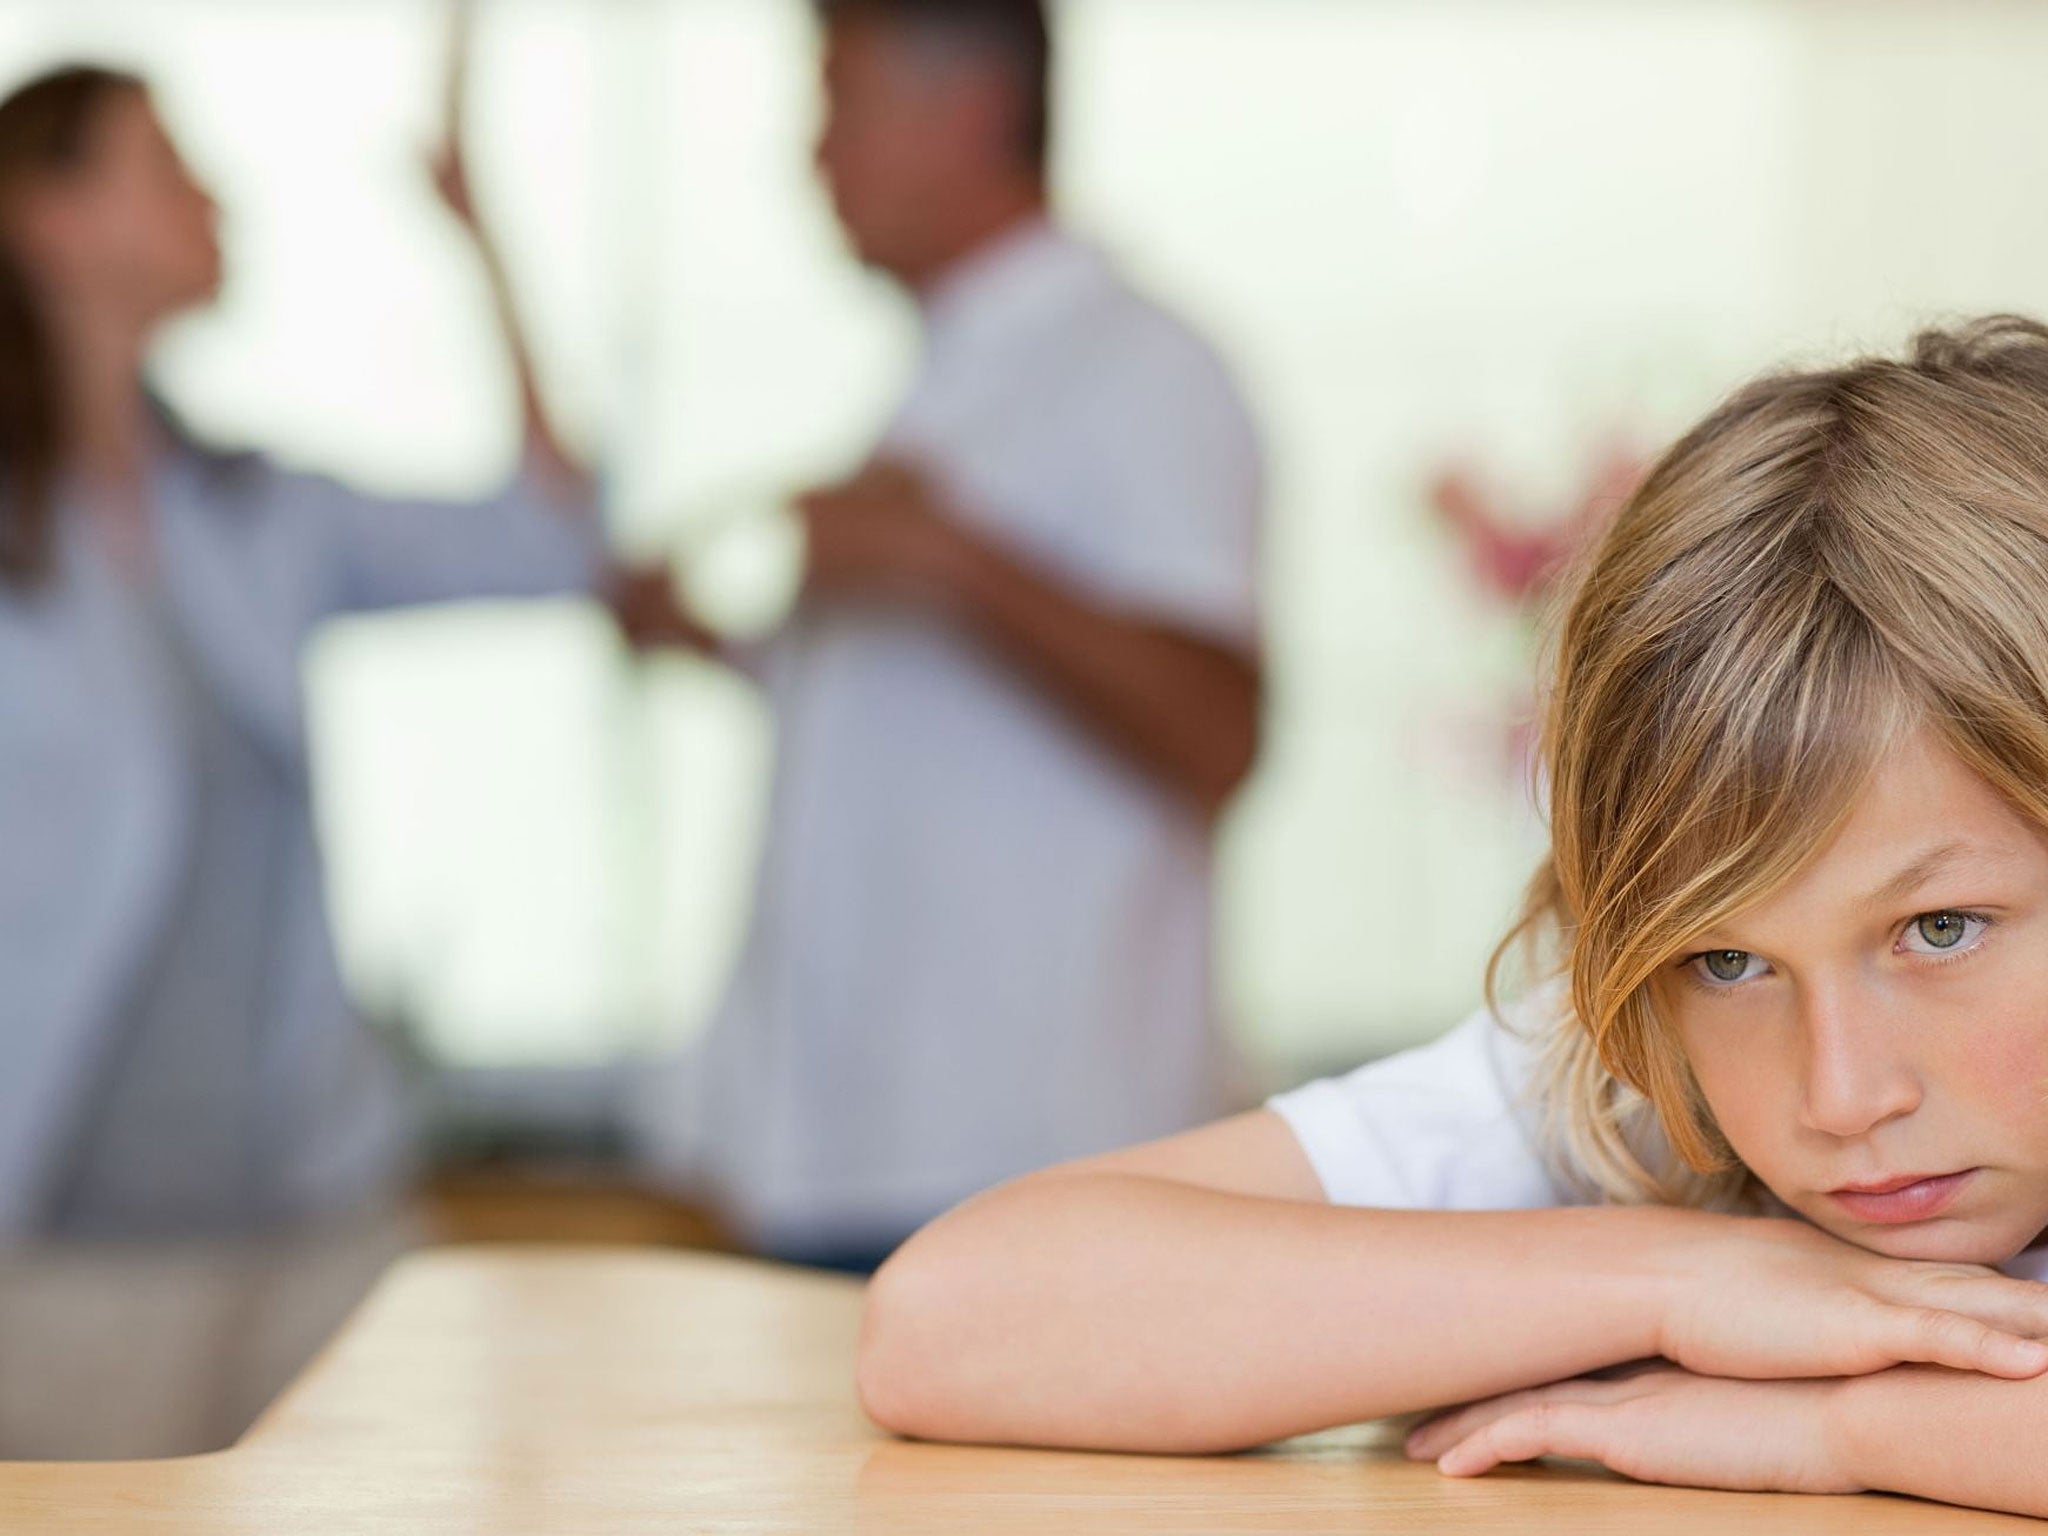 Breaking up badly: most parents want to minimise the impact their divorce has on their children